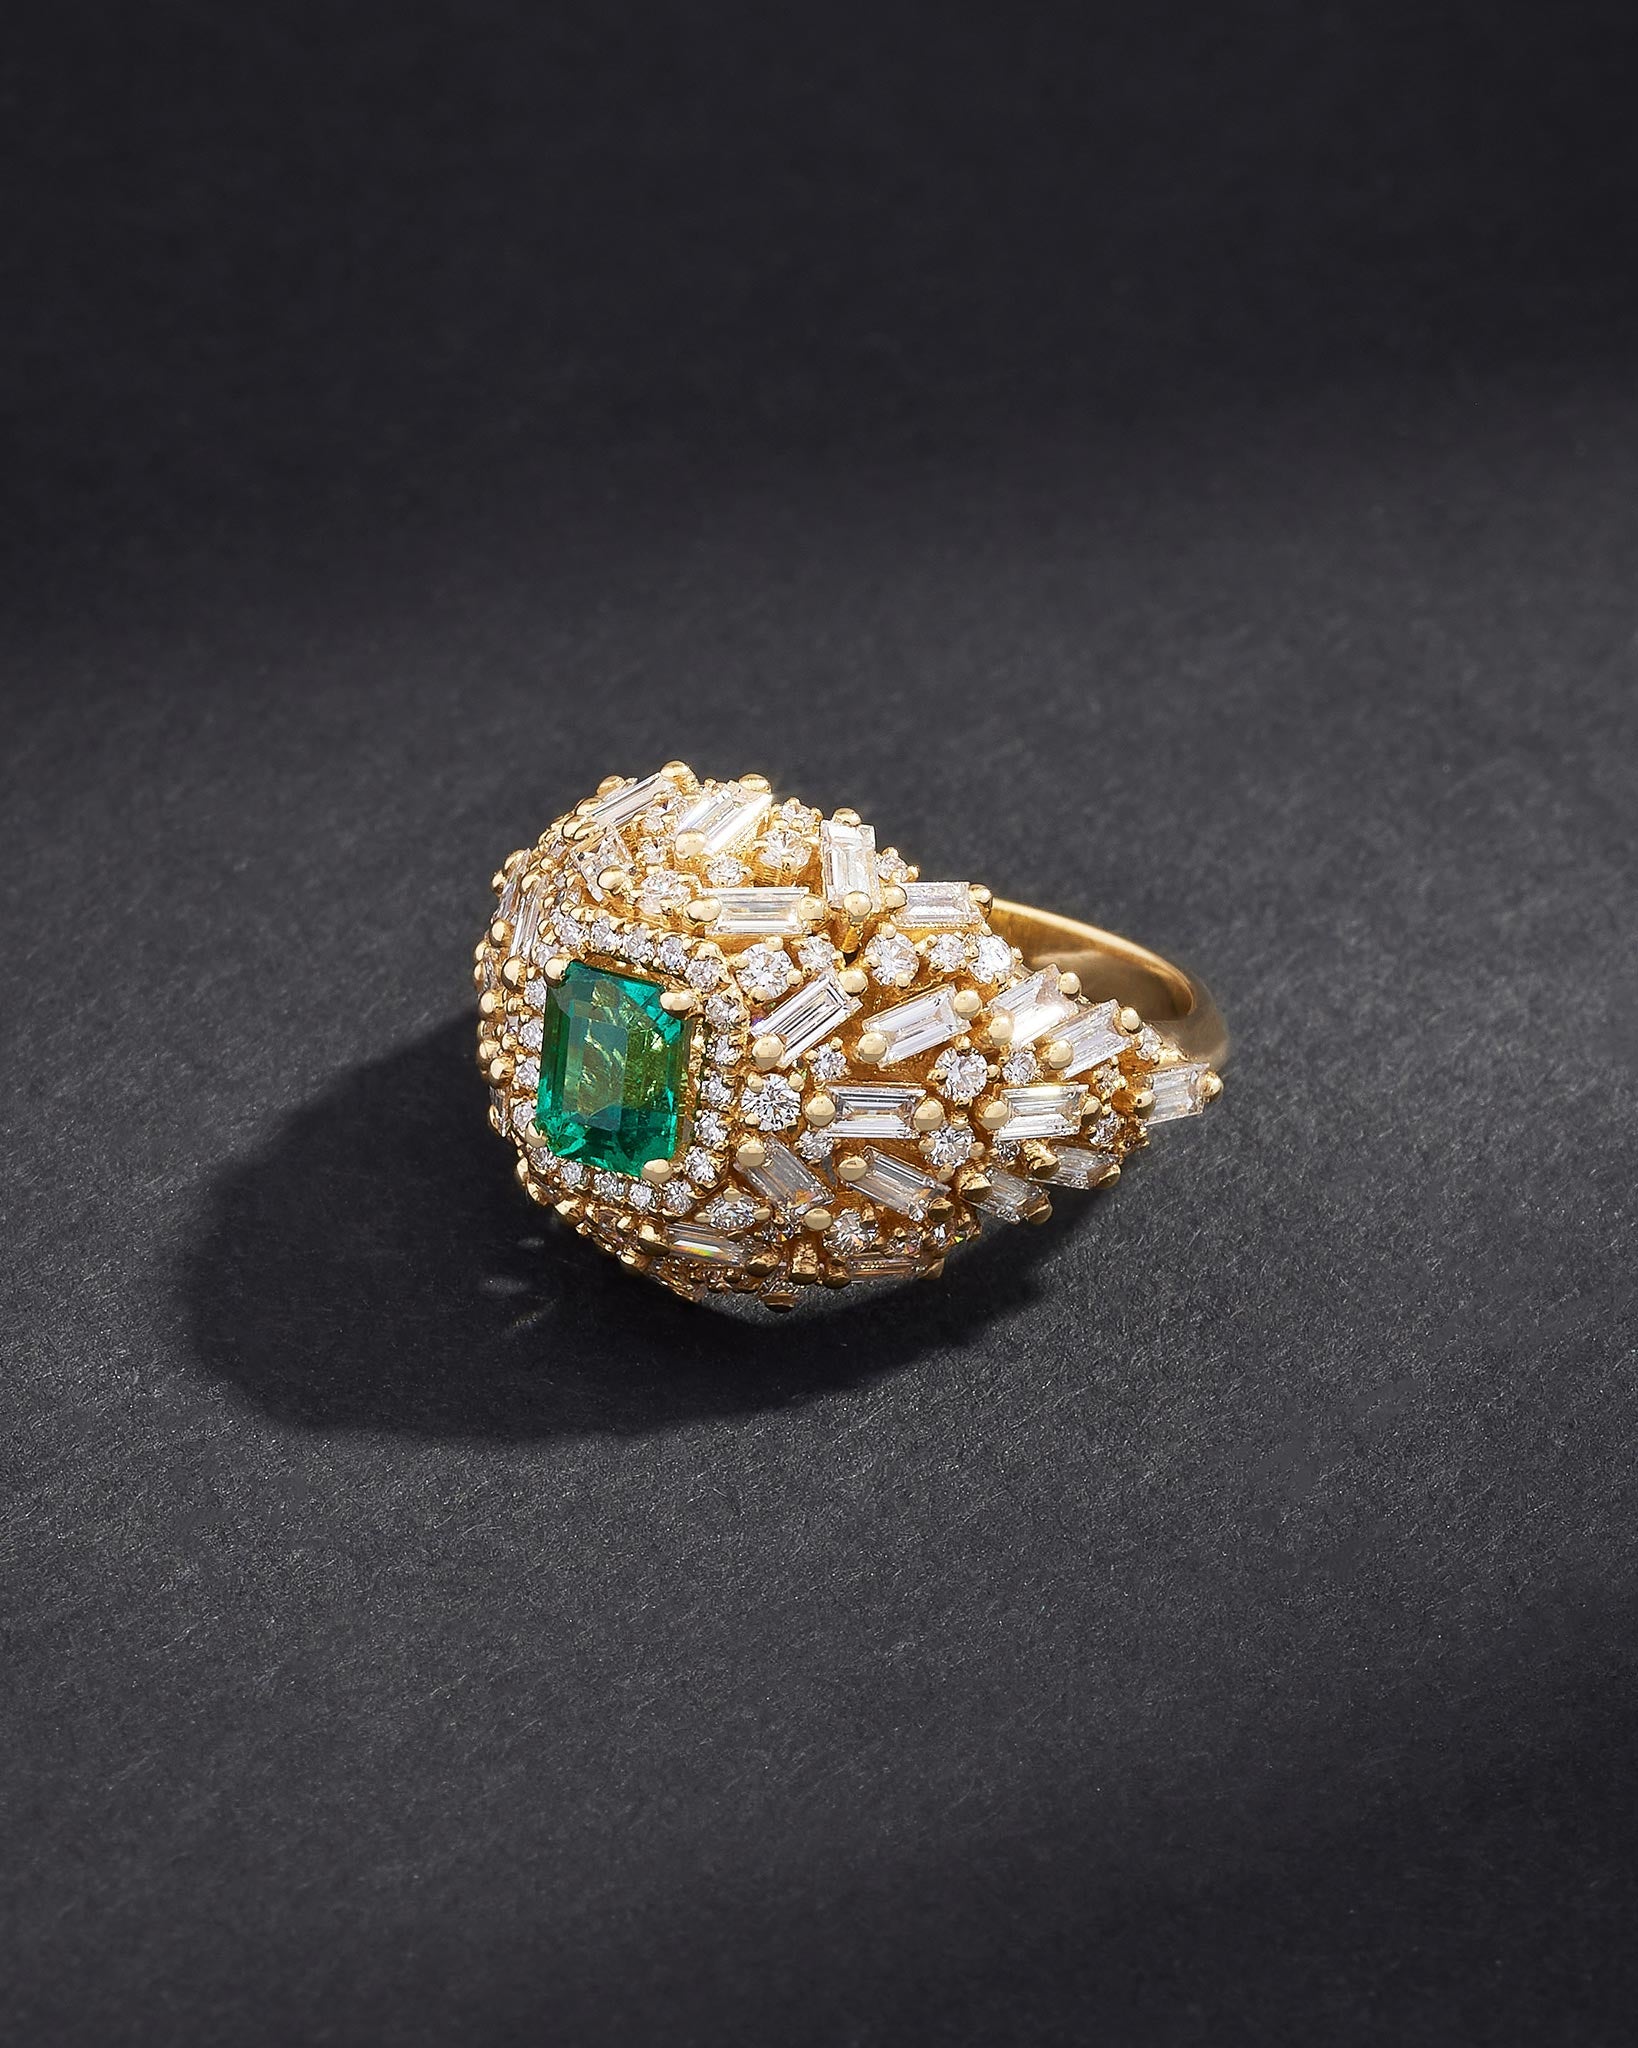 Suzanne Kalan One of a Kind Cushion Cut Emerald Lion's Mane Ring in 18k yellow gold